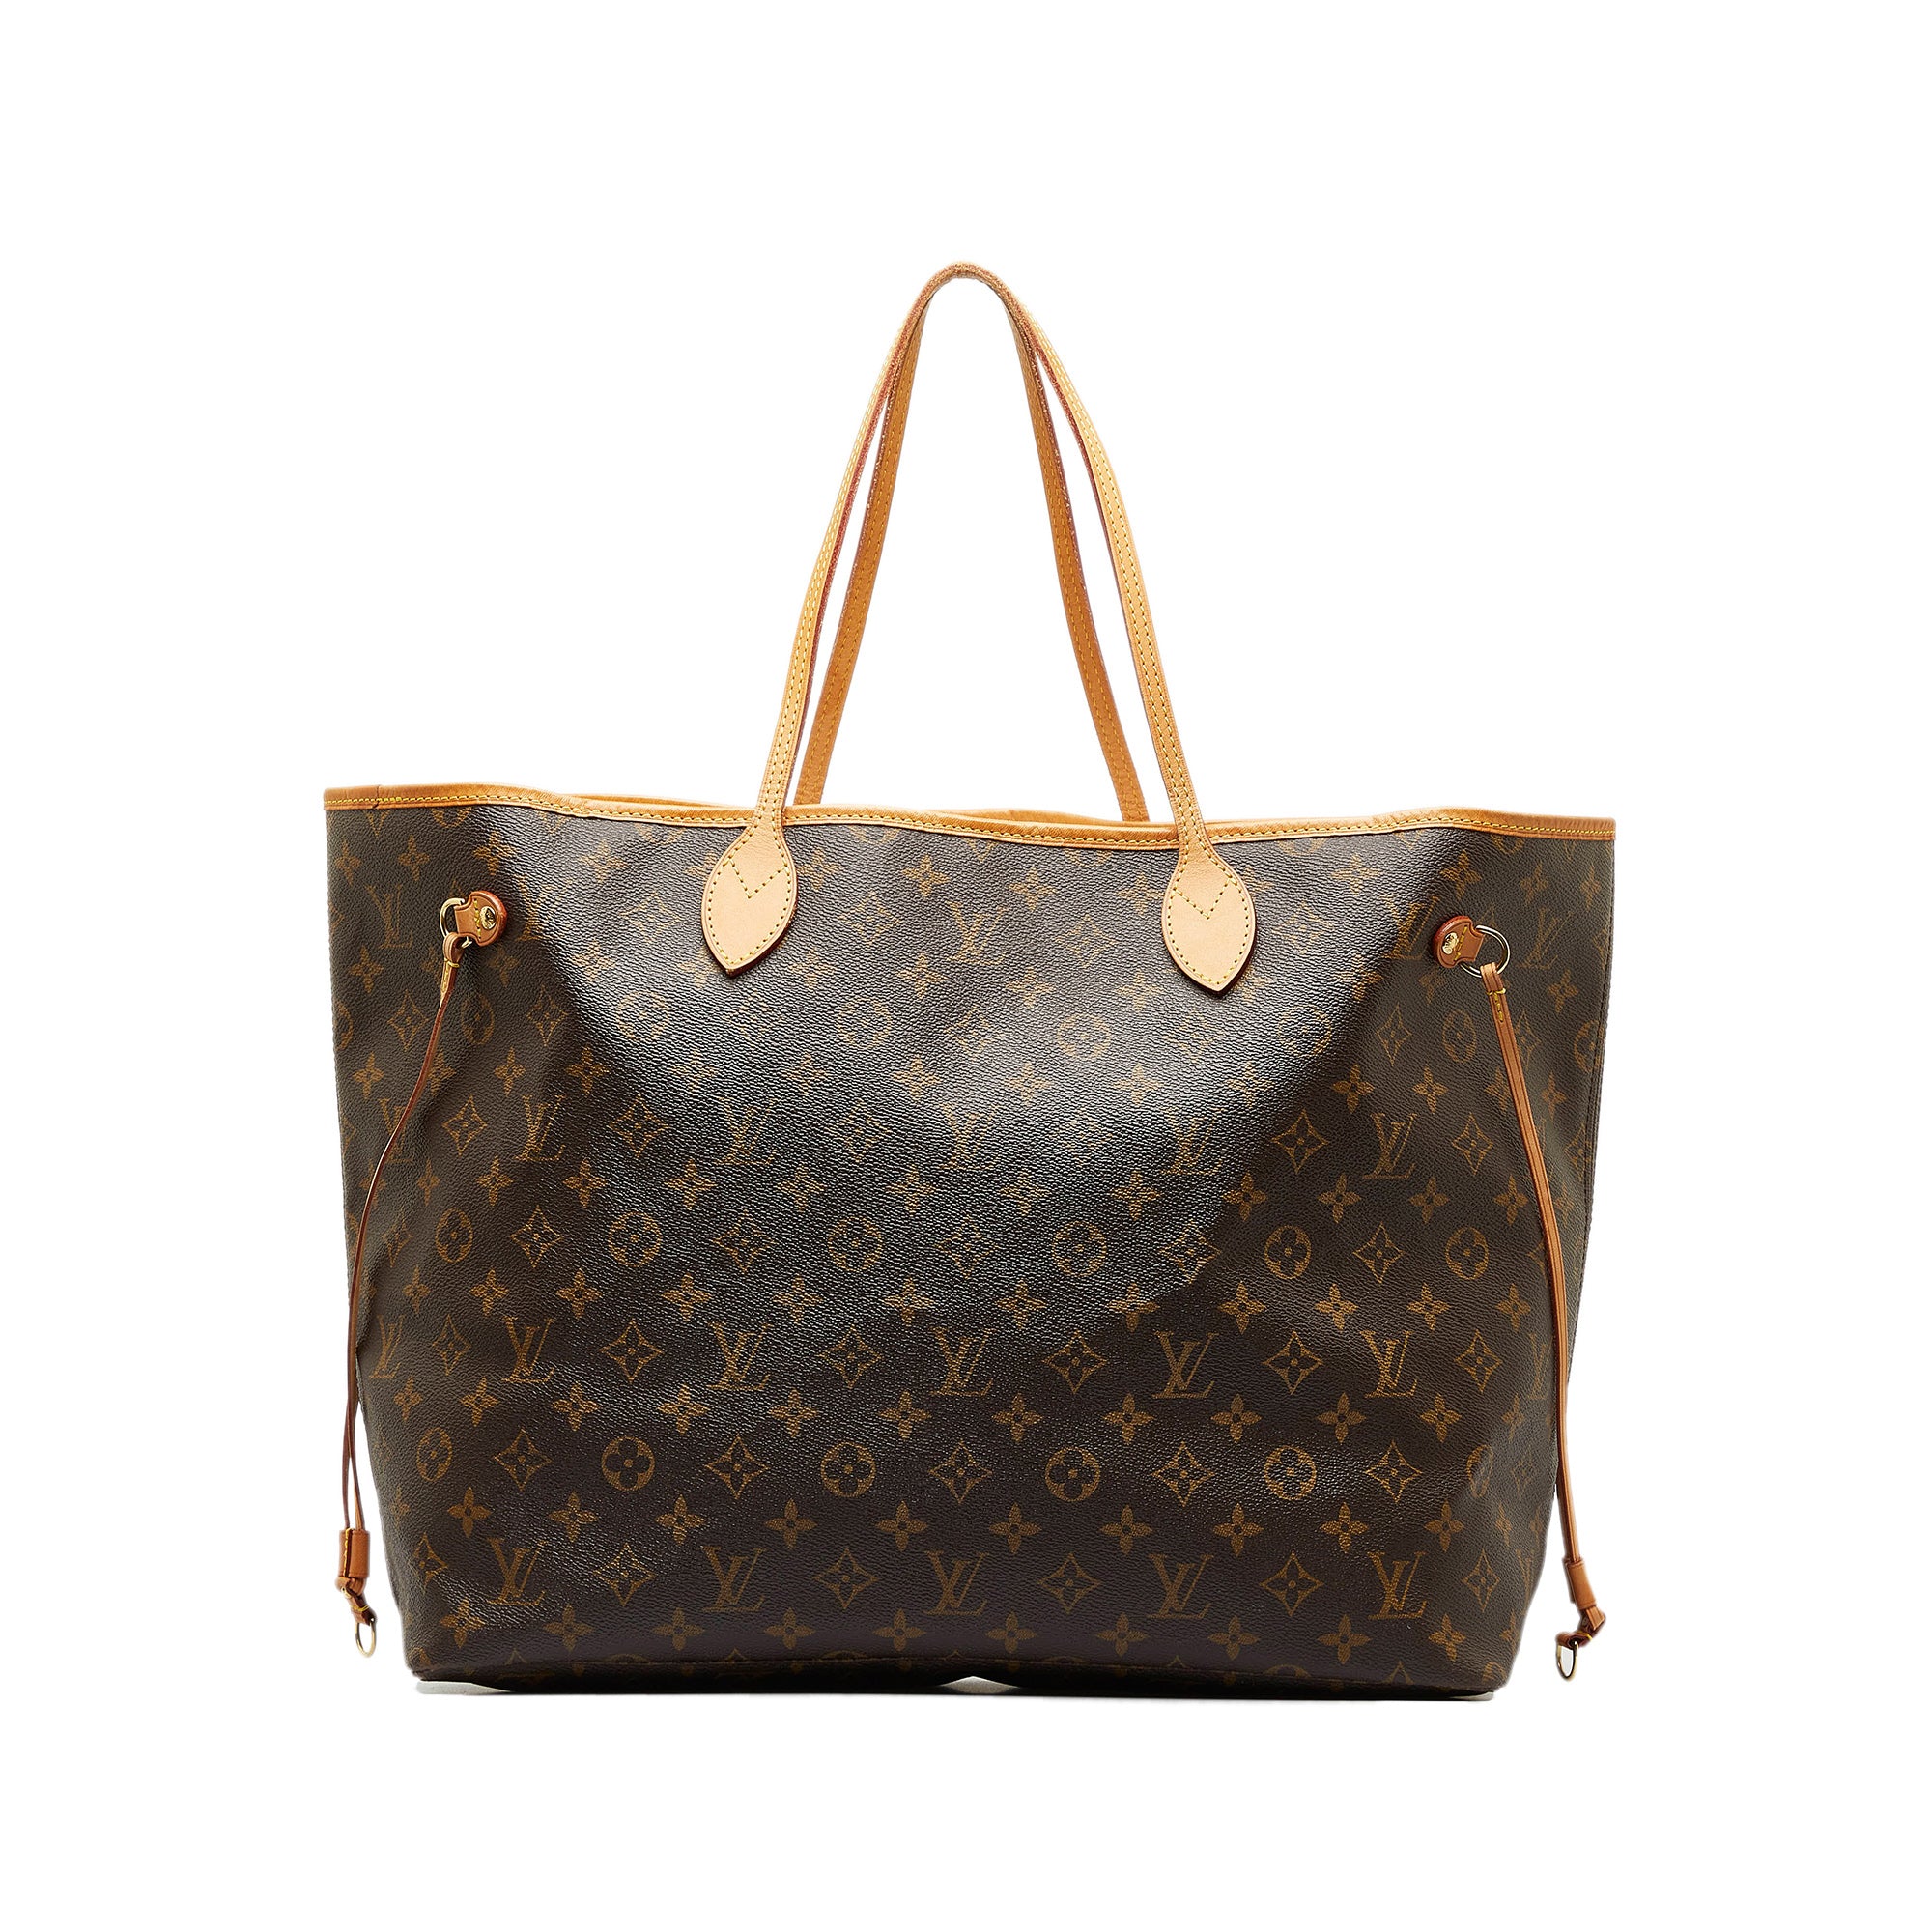 Why I Exchanged my Louis Vuitton Onthego GM Reverse Monogram for